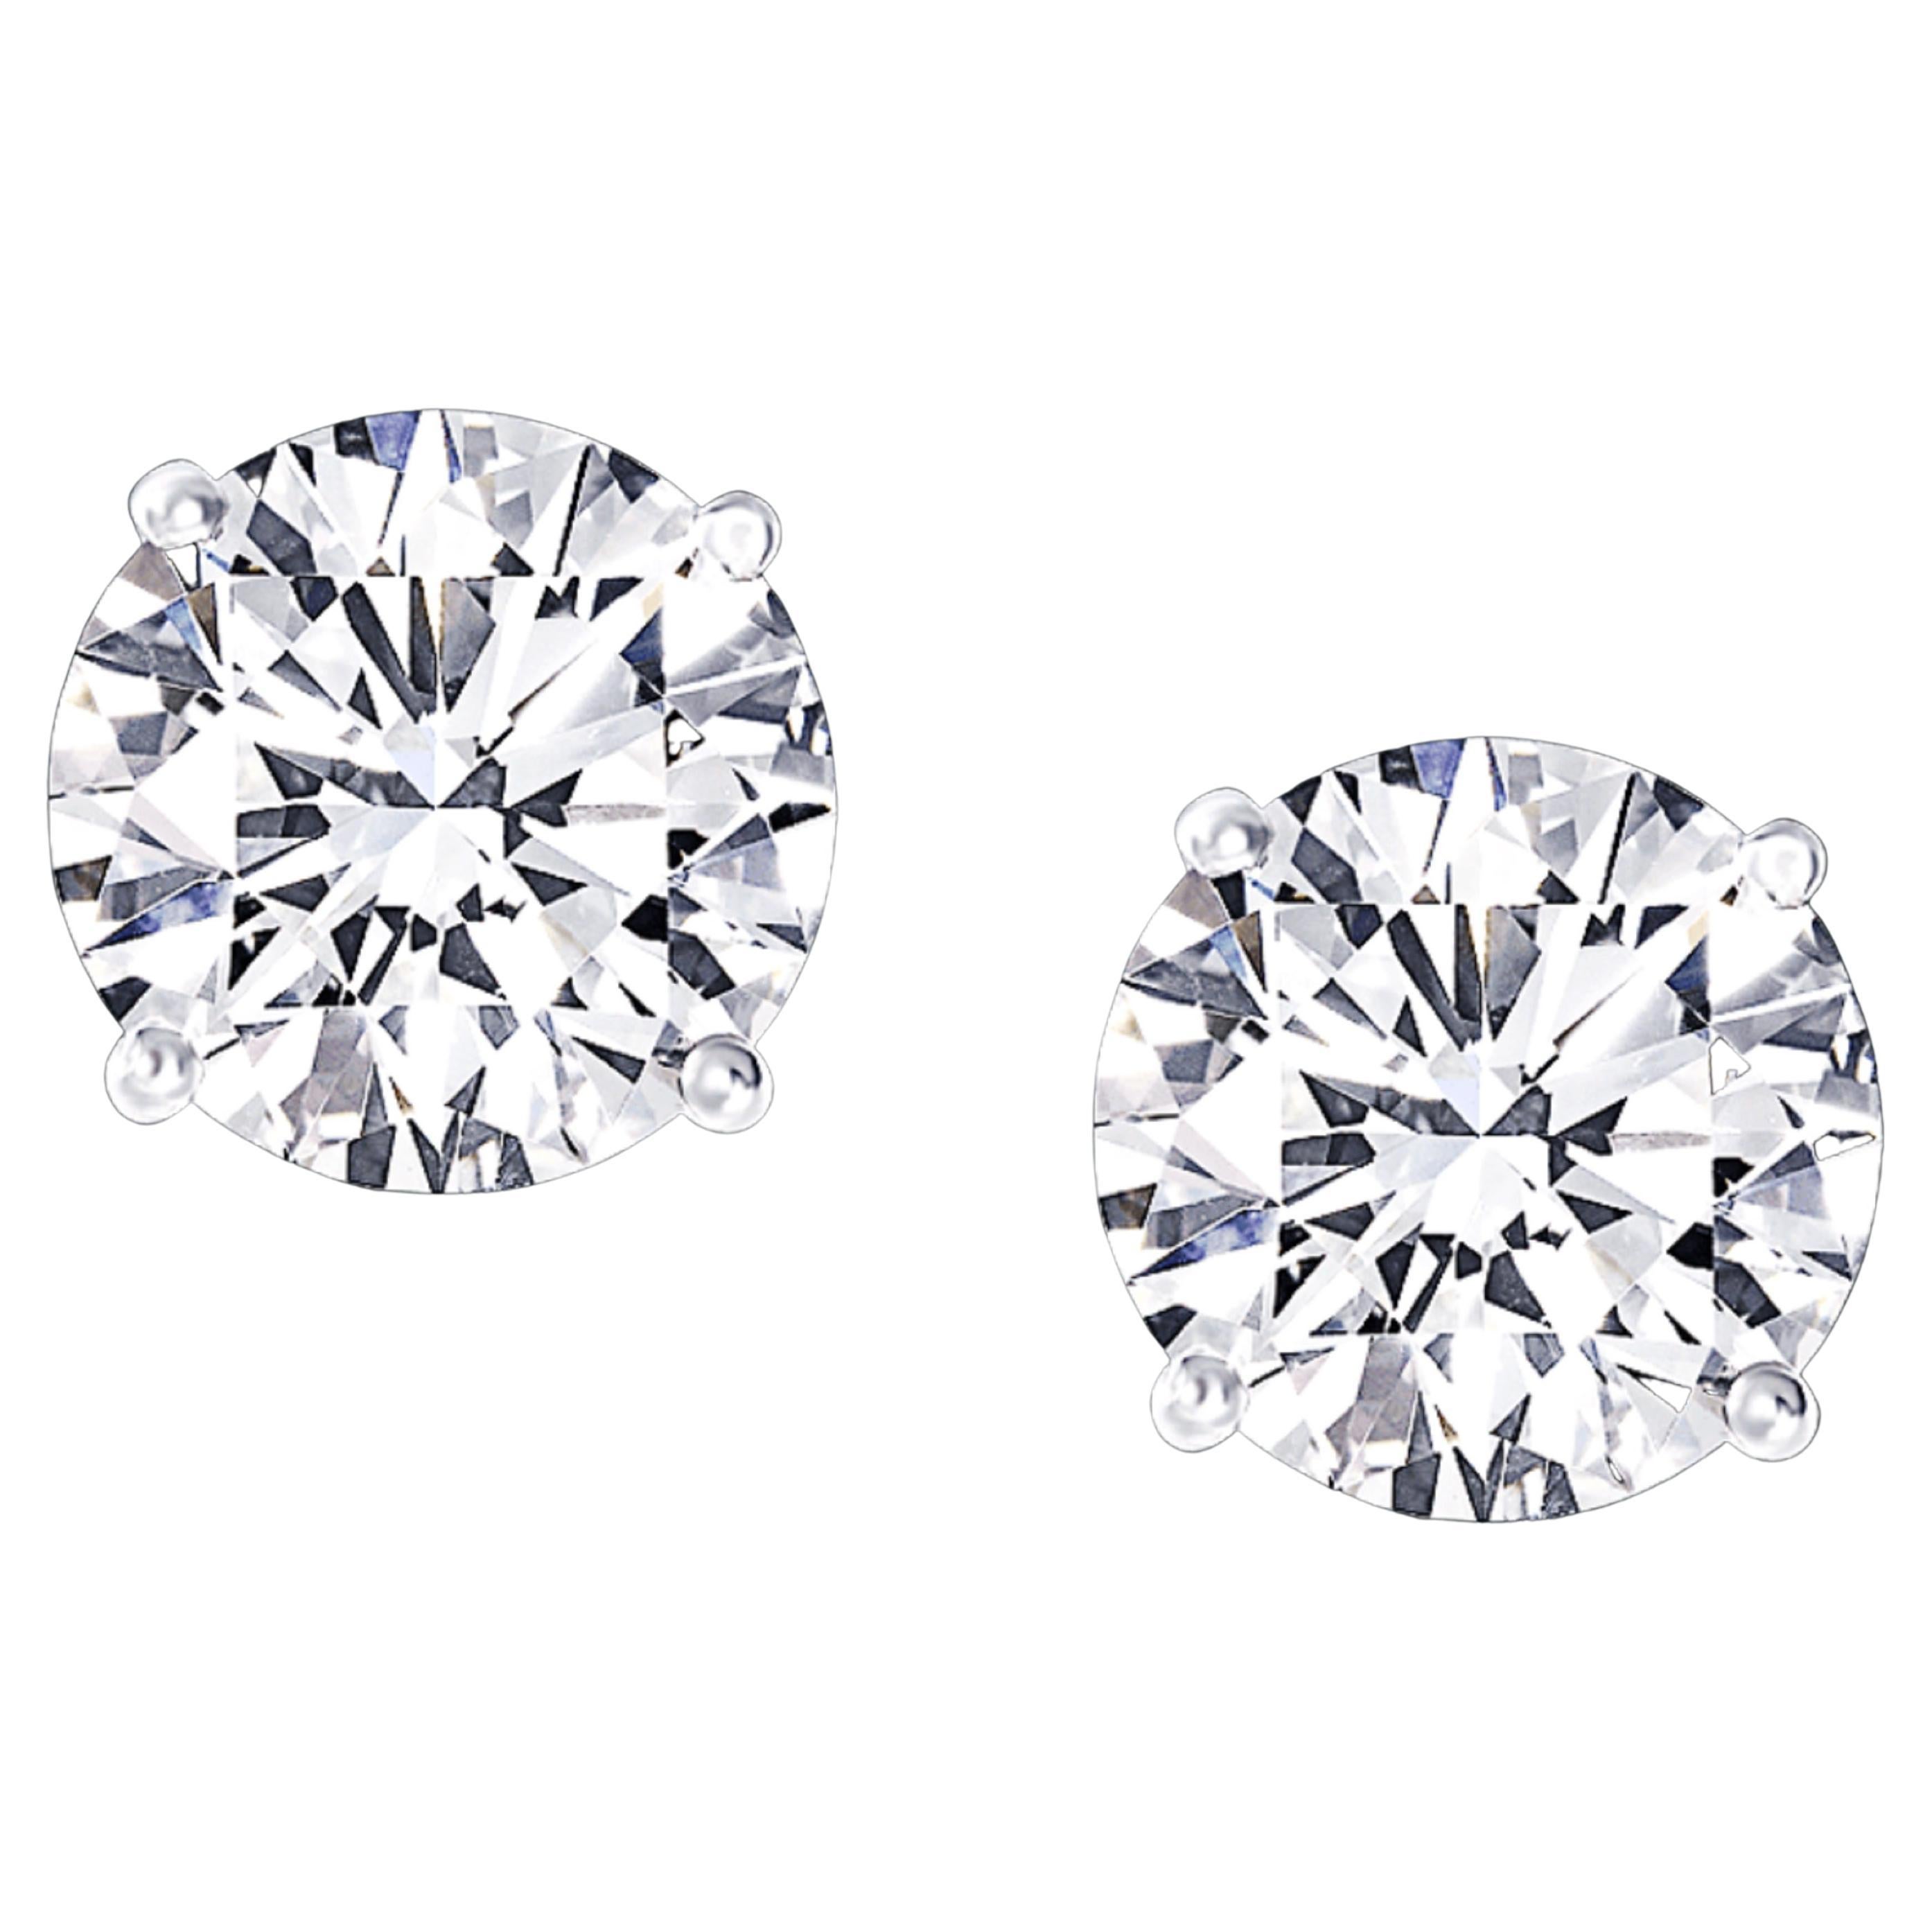 Flawless Clarity GIA Certified 6 Carat Round Brilliant Cut Diamond Studs For Sale